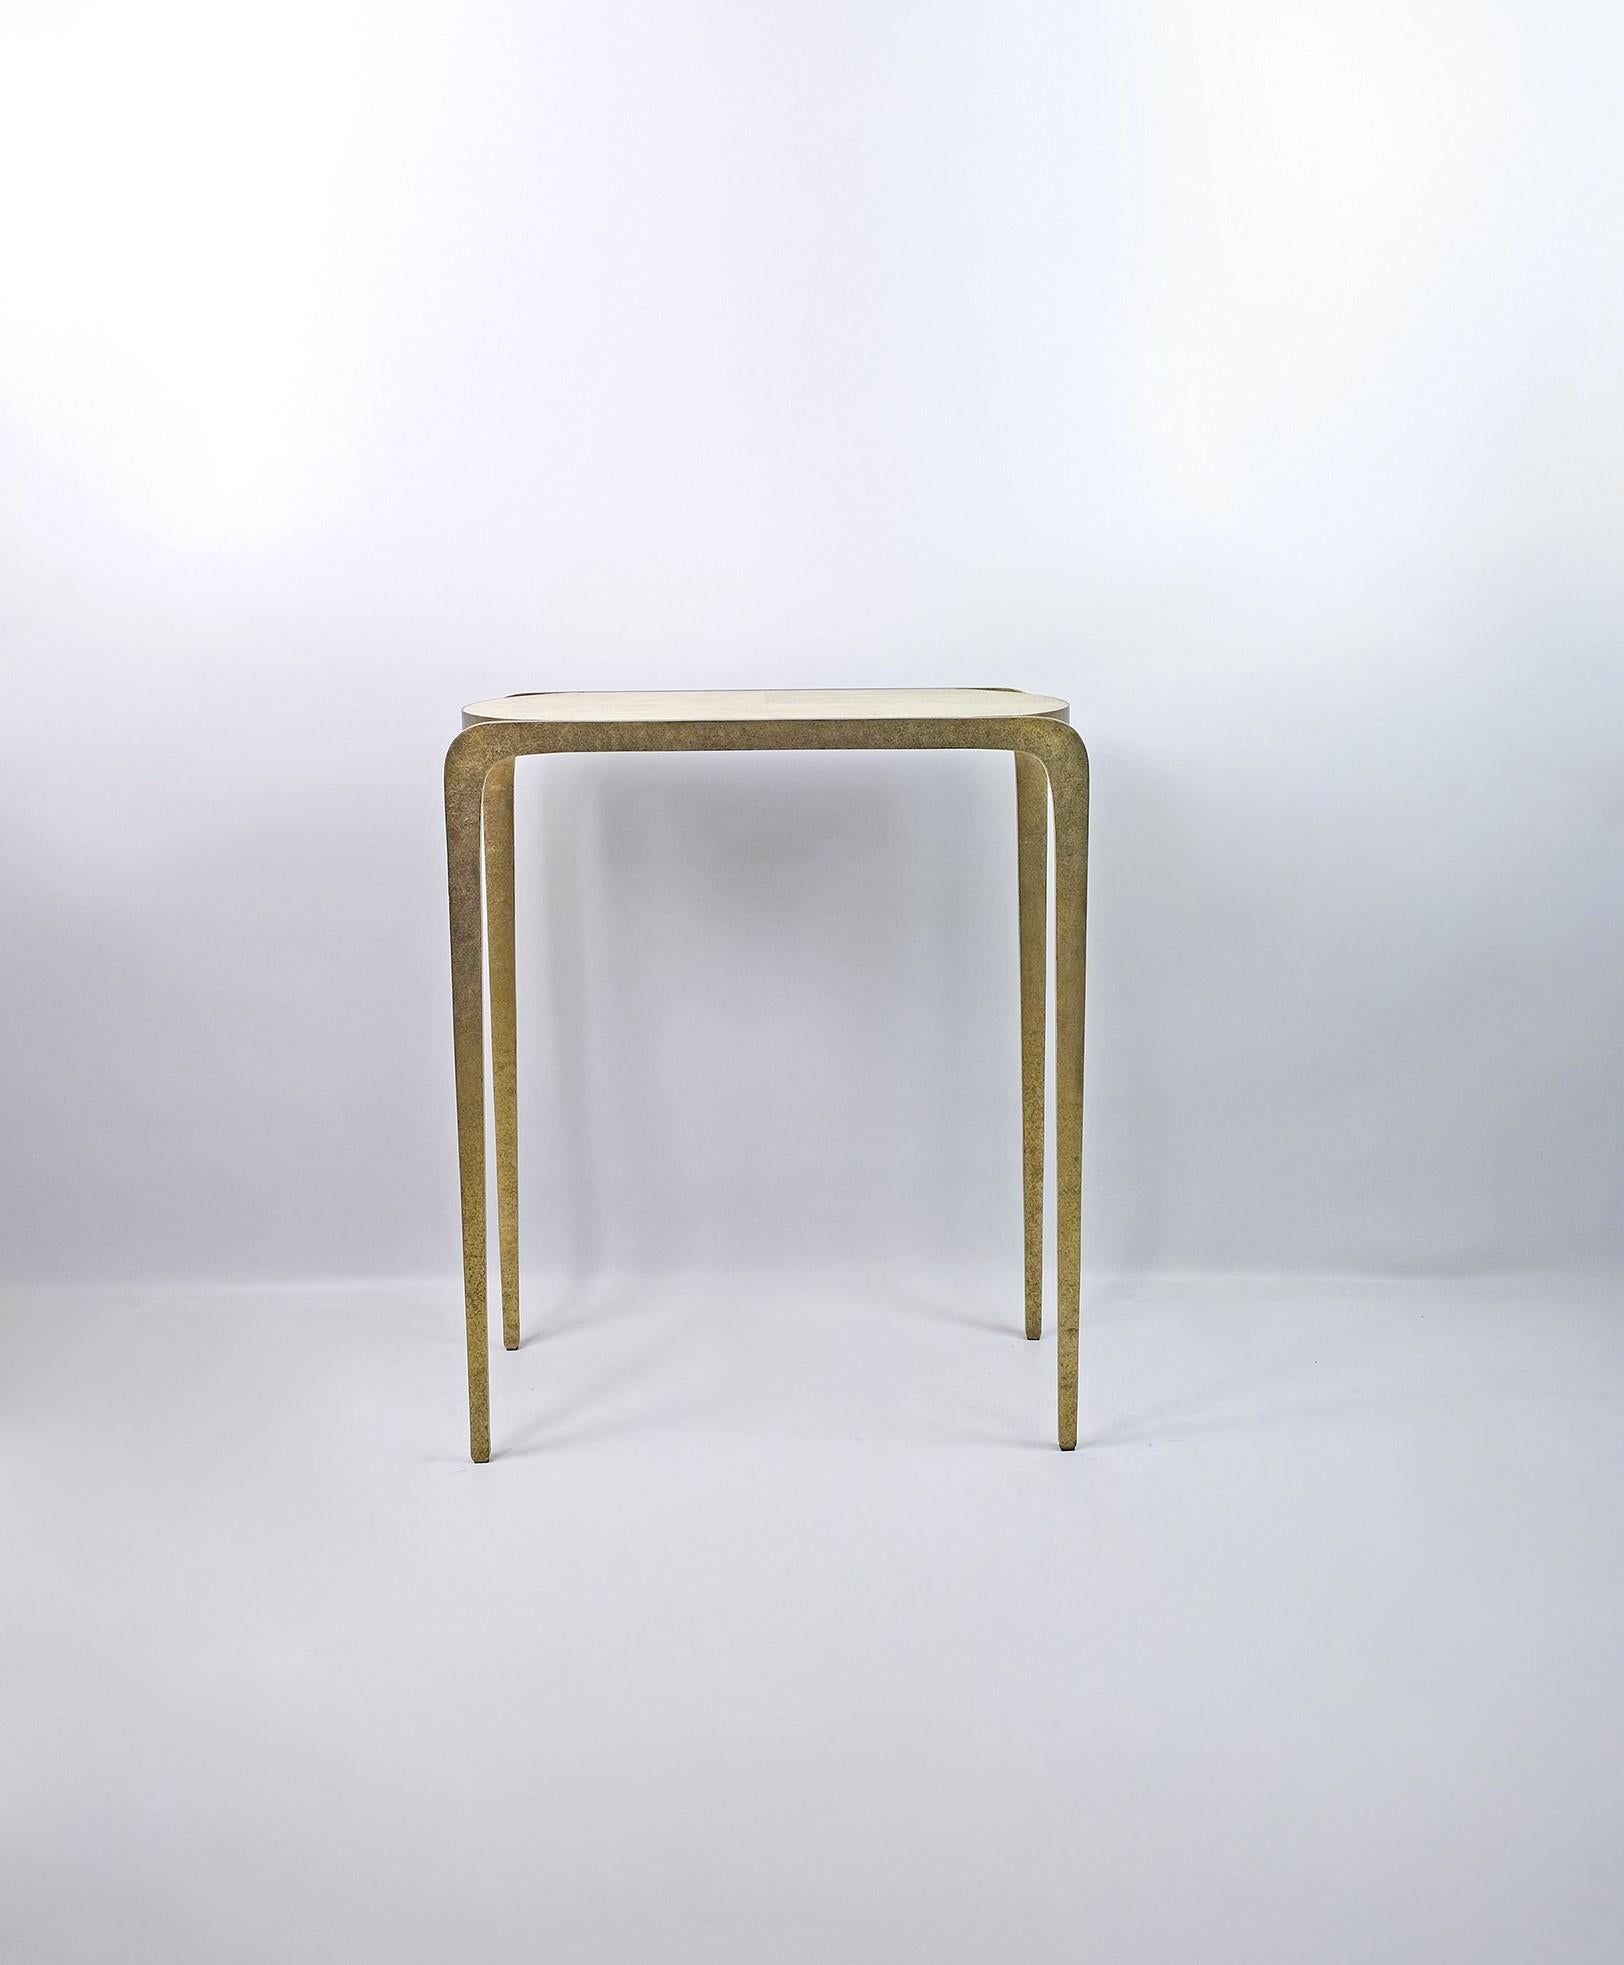 The console table 